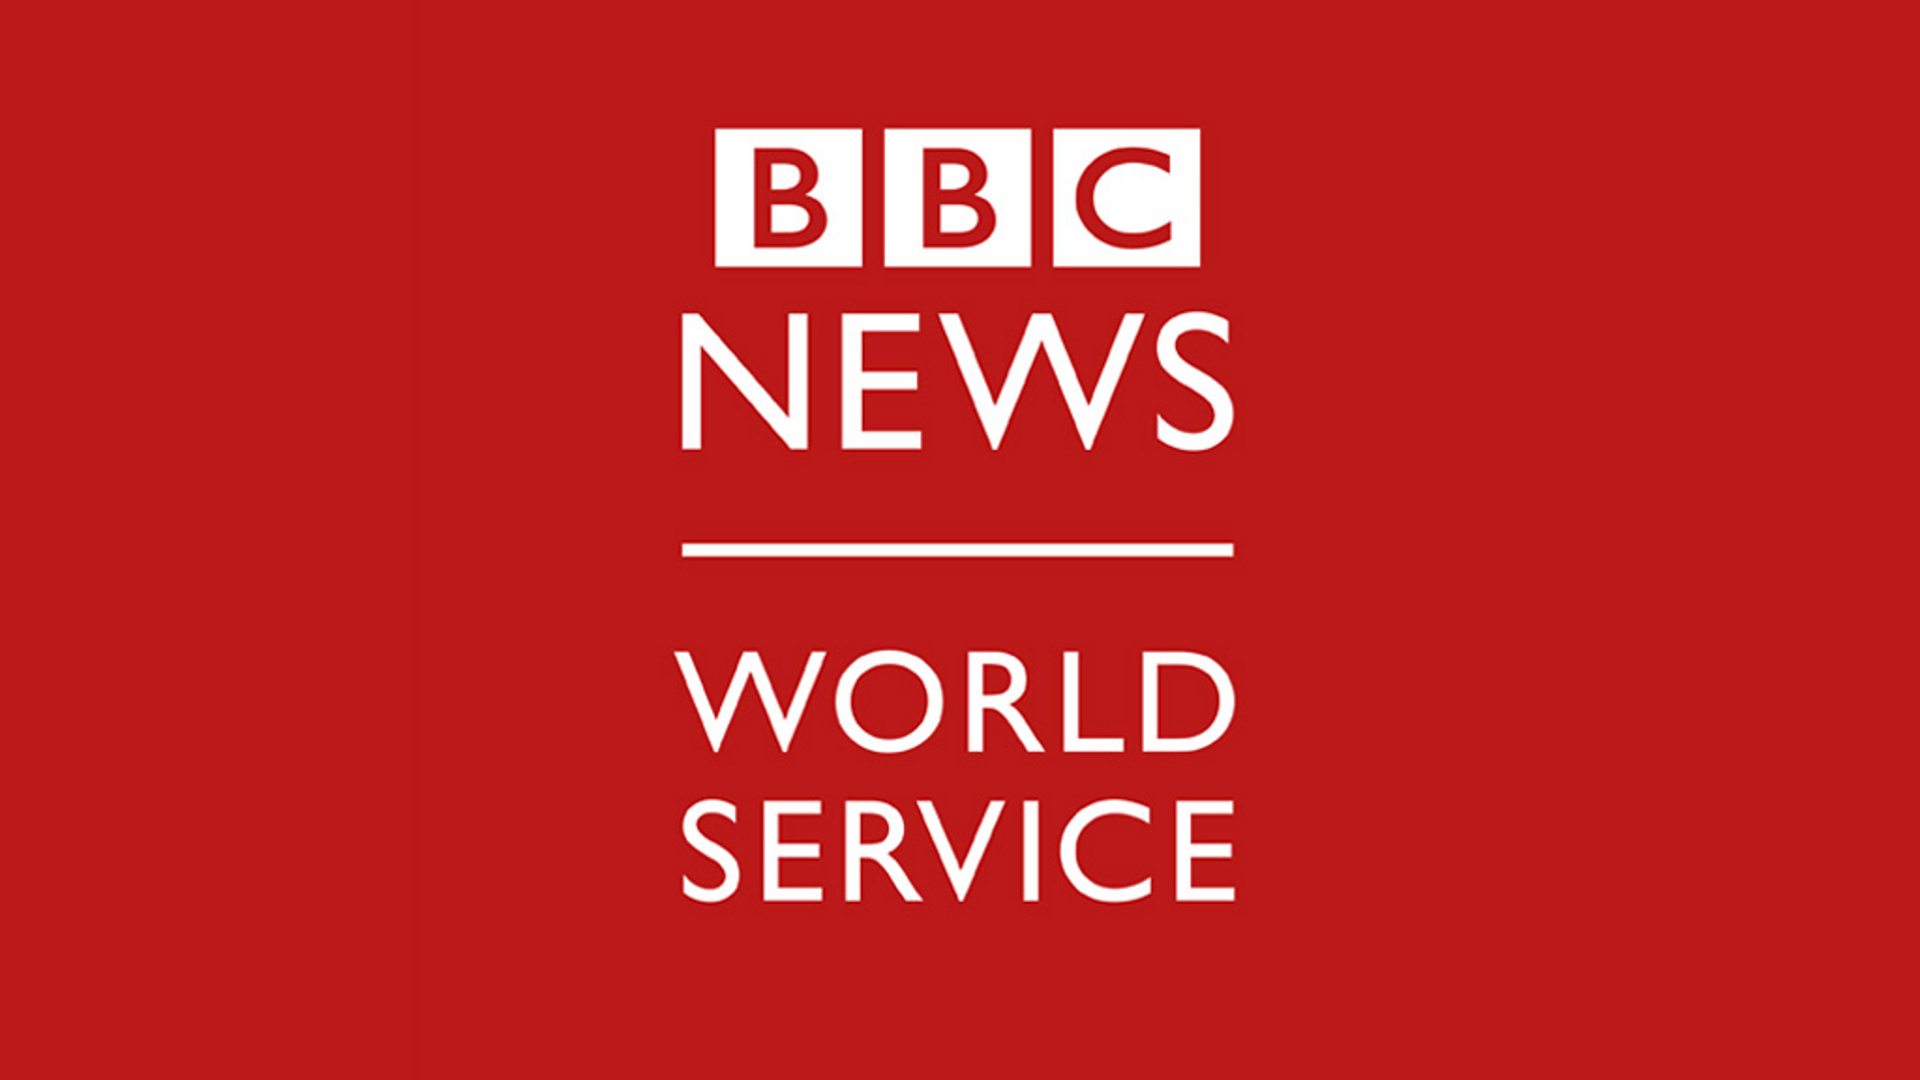 Bbc World Service Outlines Move To Digital First Service Media Centre